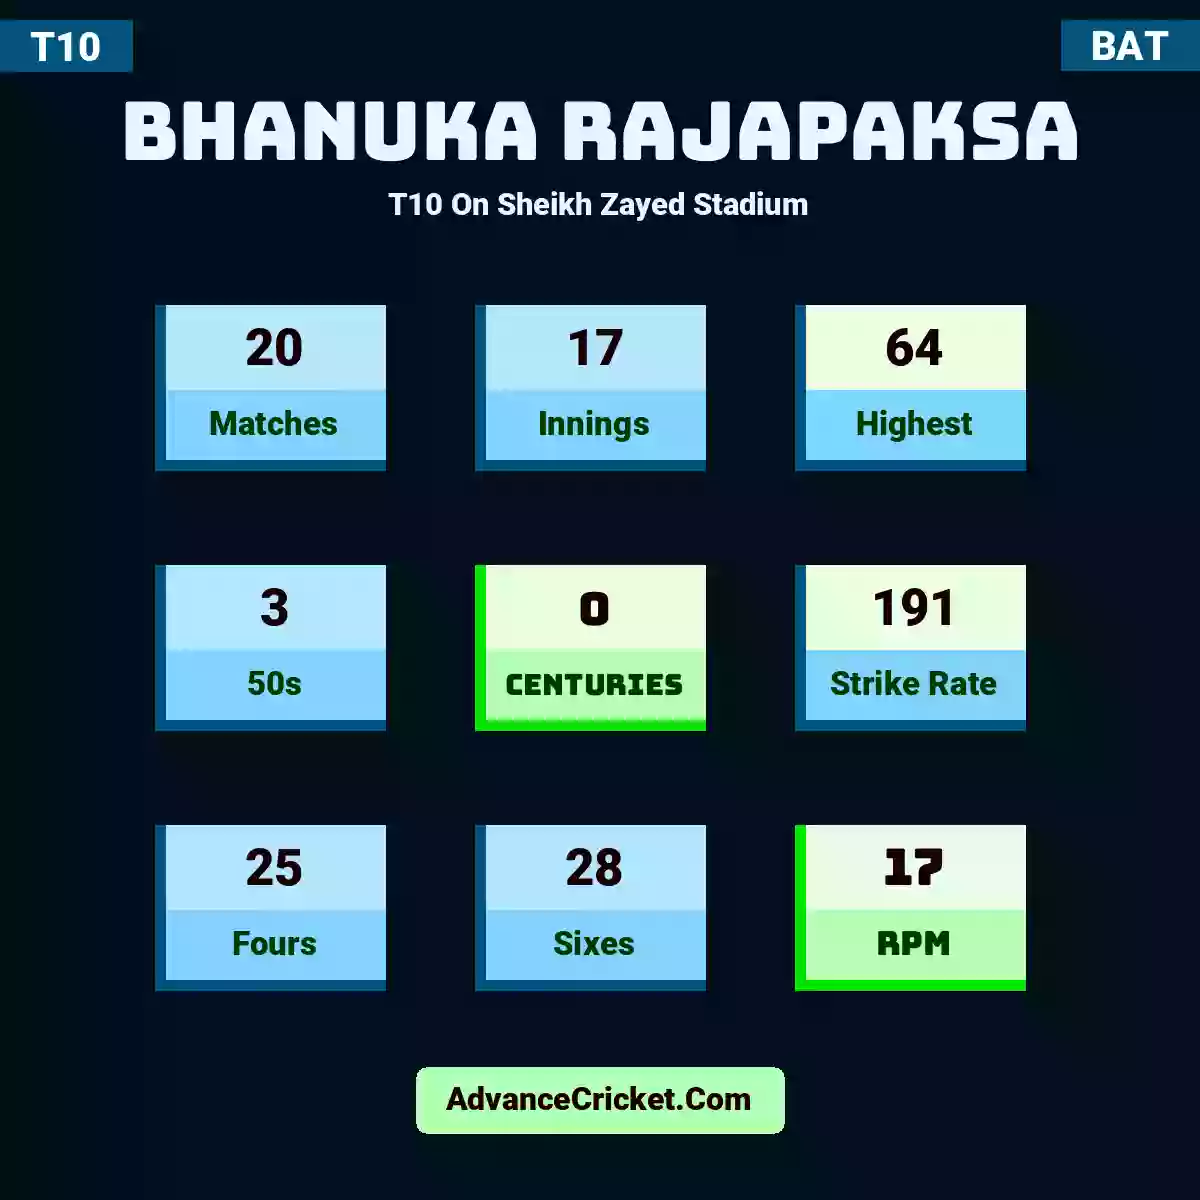 Bhanuka Rajapaksa T10  On Sheikh Zayed Stadium, Bhanuka Rajapaksa played 20 matches, scored 64 runs as highest, 3 half-centuries, and 0 centuries, with a strike rate of 191. B.Rajapaksa hit 25 fours and 28 sixes, with an RPM of 17.